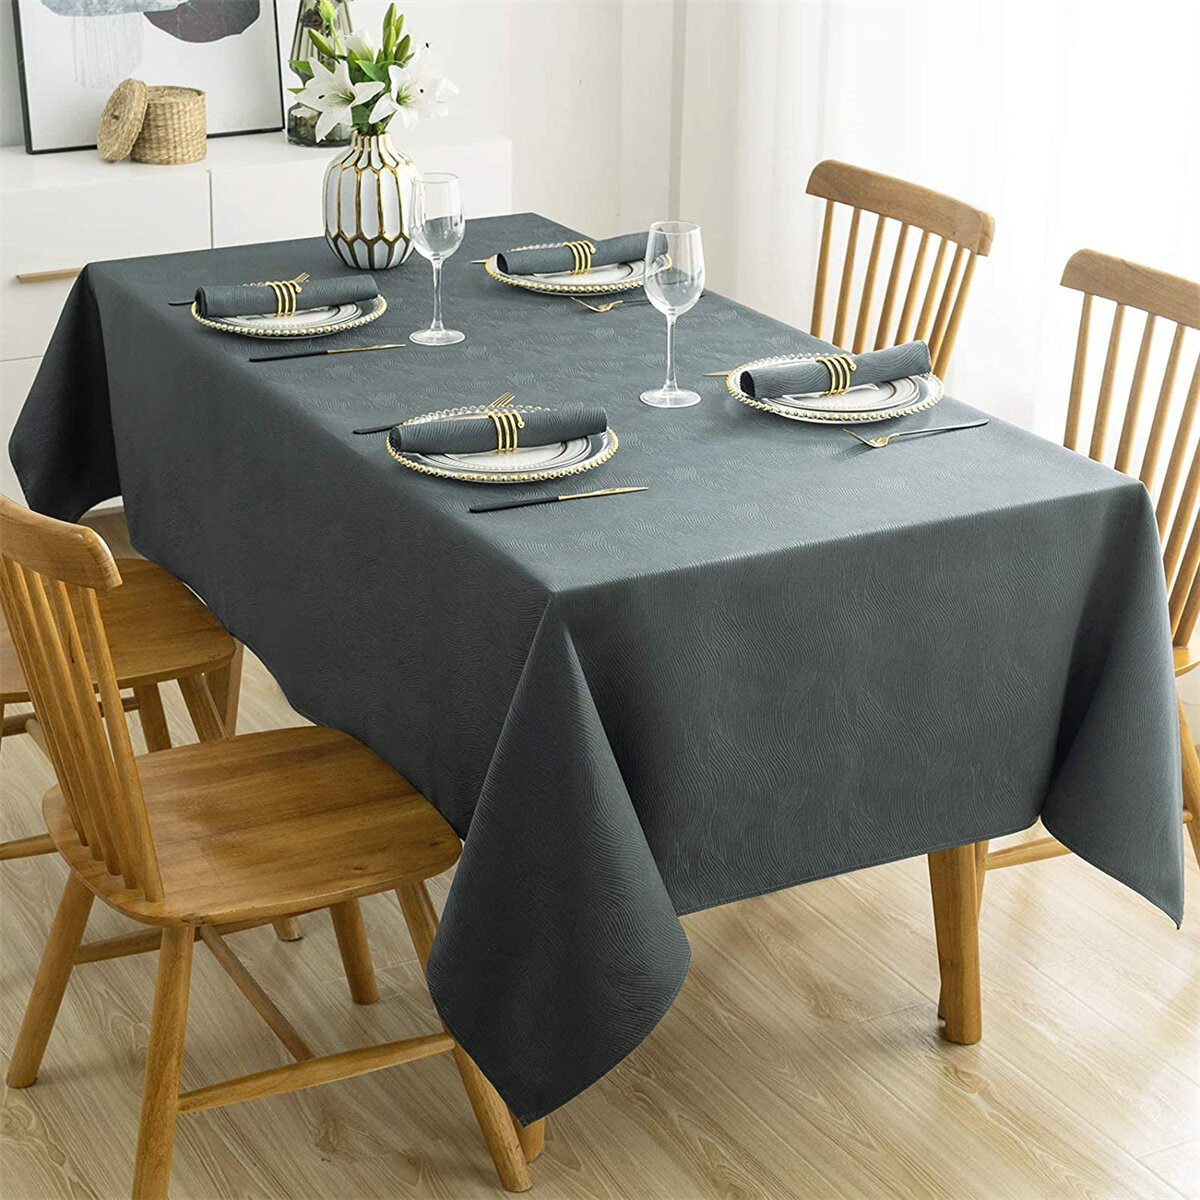 54x72 inch Paw Print Animal Footprint Waterproof and Wrinkle Resistant Polyester Table Cloth for Kitchen/Dining/Party/Wedding Indoor and Outdoor Use Tablecloth 